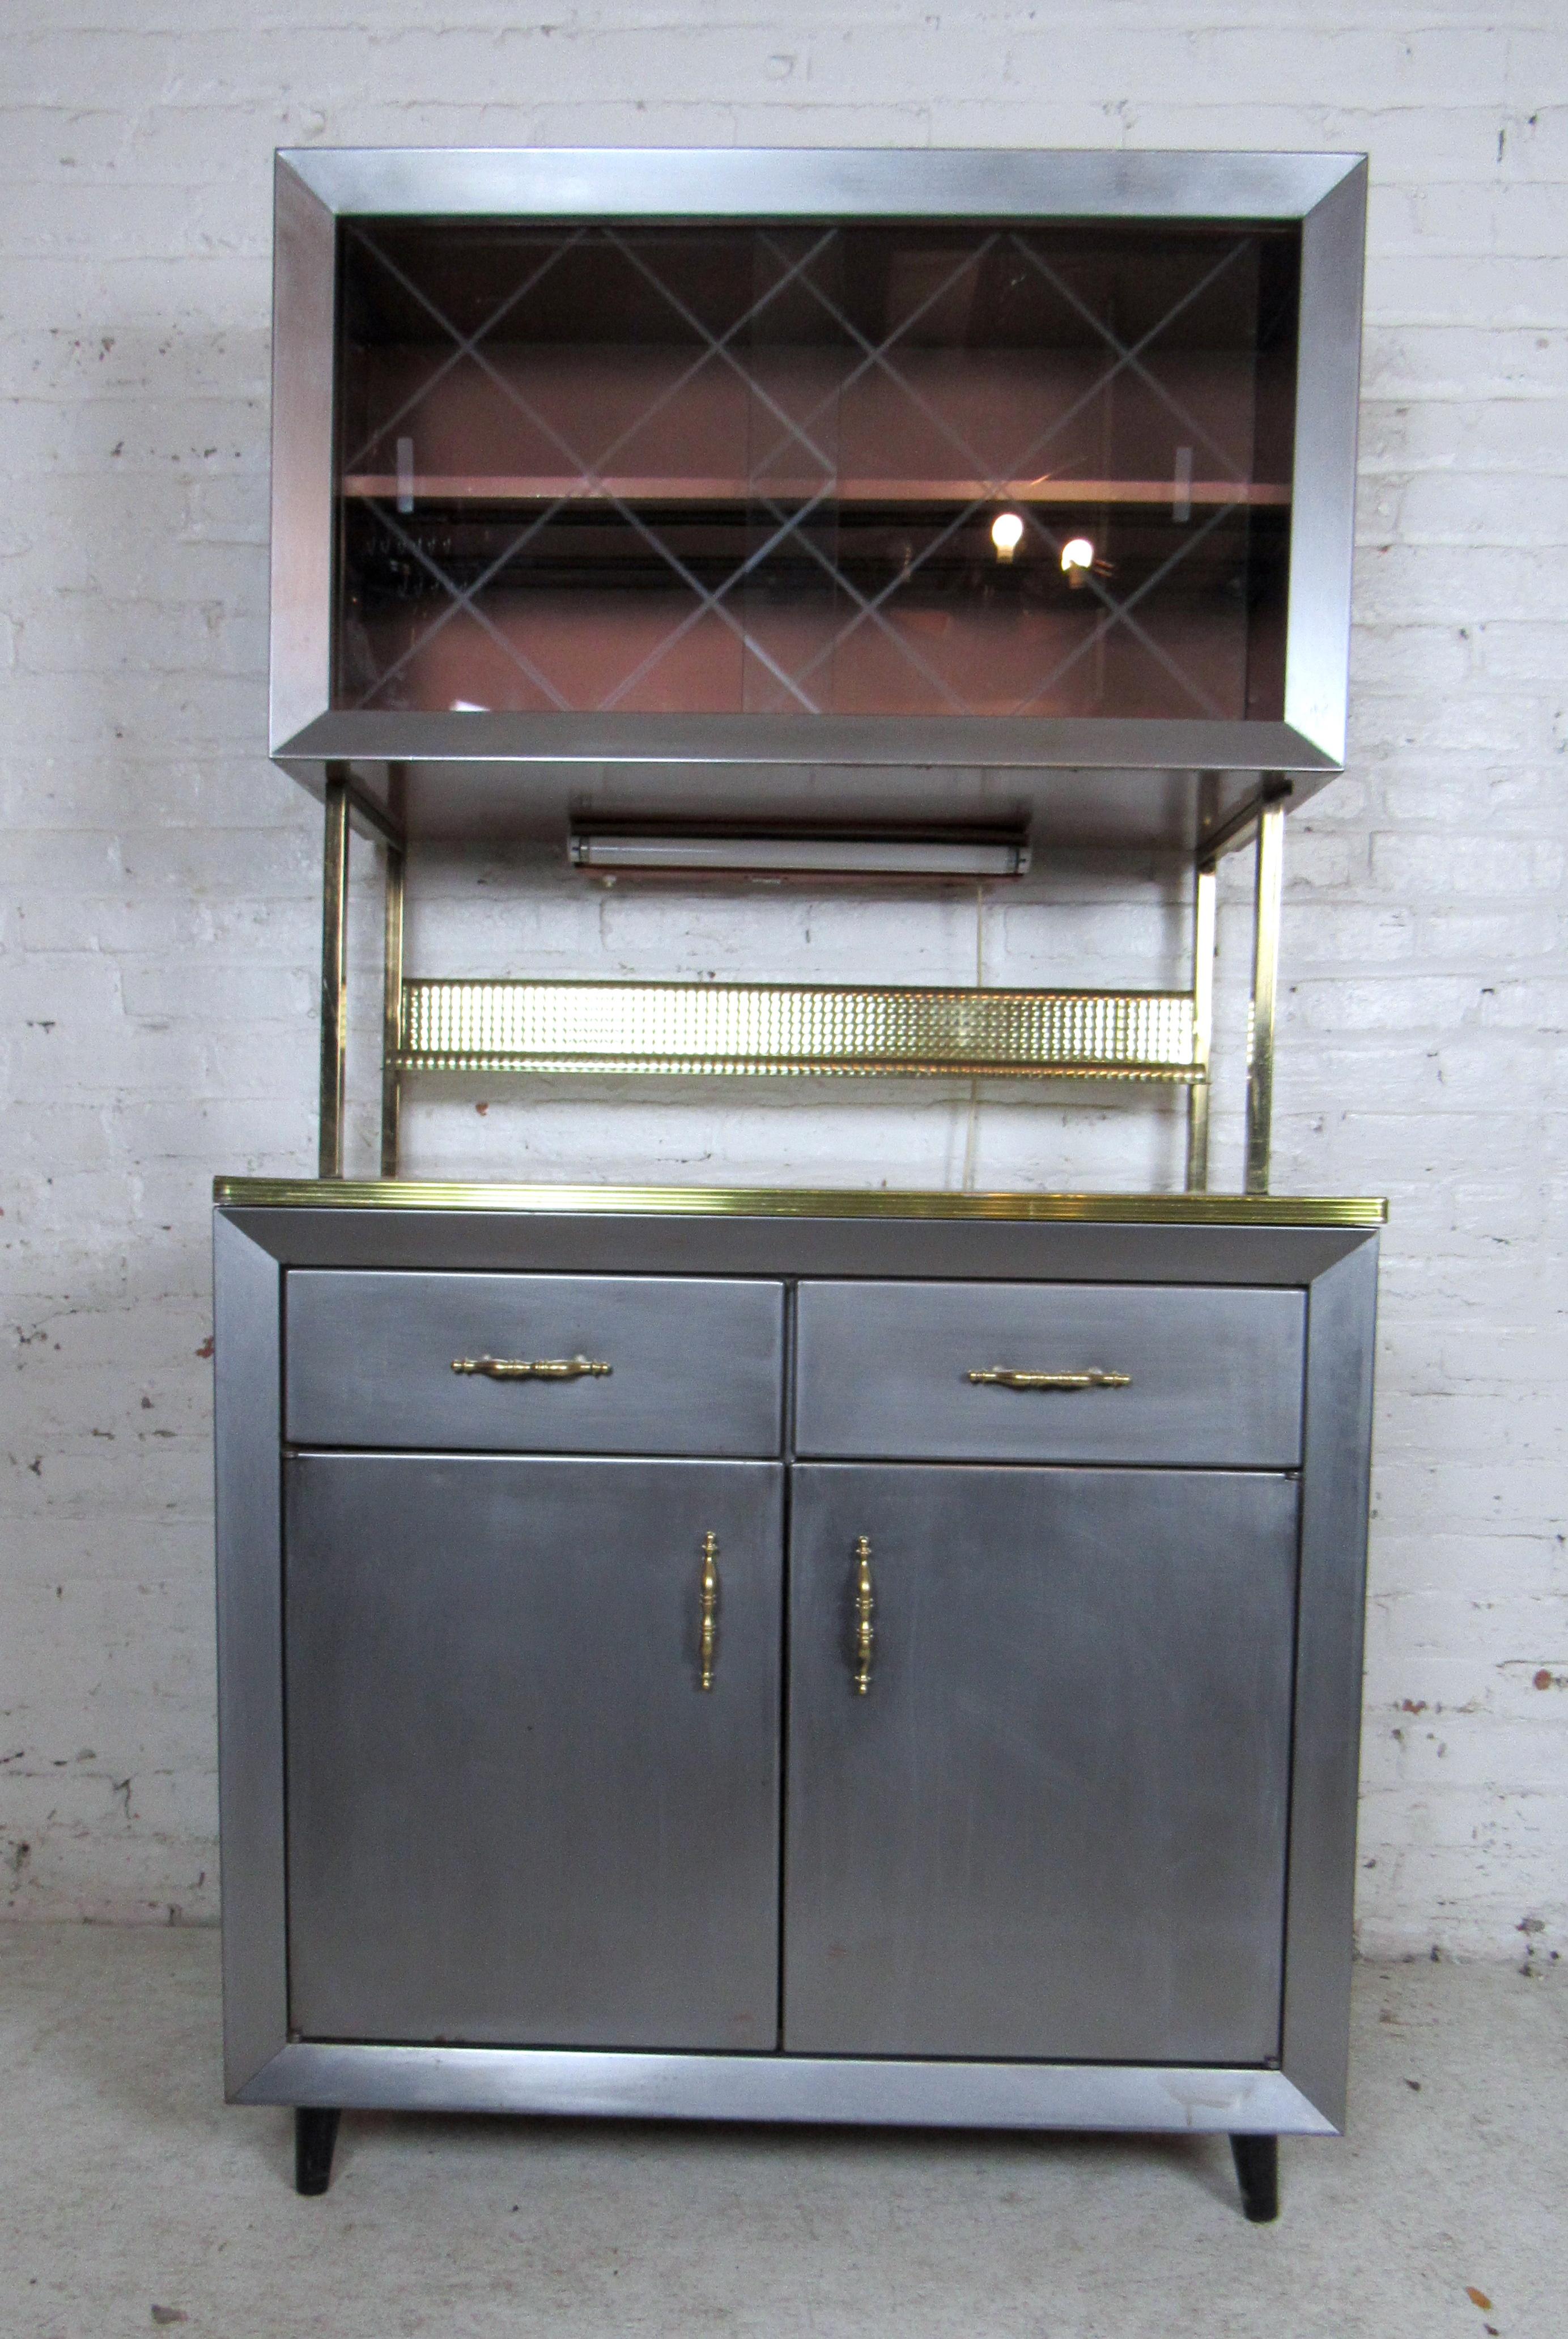 Sleek vintage metal cabinet featuring two drawers, a spacious storage cabinet below.
The top hutch includes glass sliding doors and one shelf.

Please confirm item location with dealer (NJ or NY).